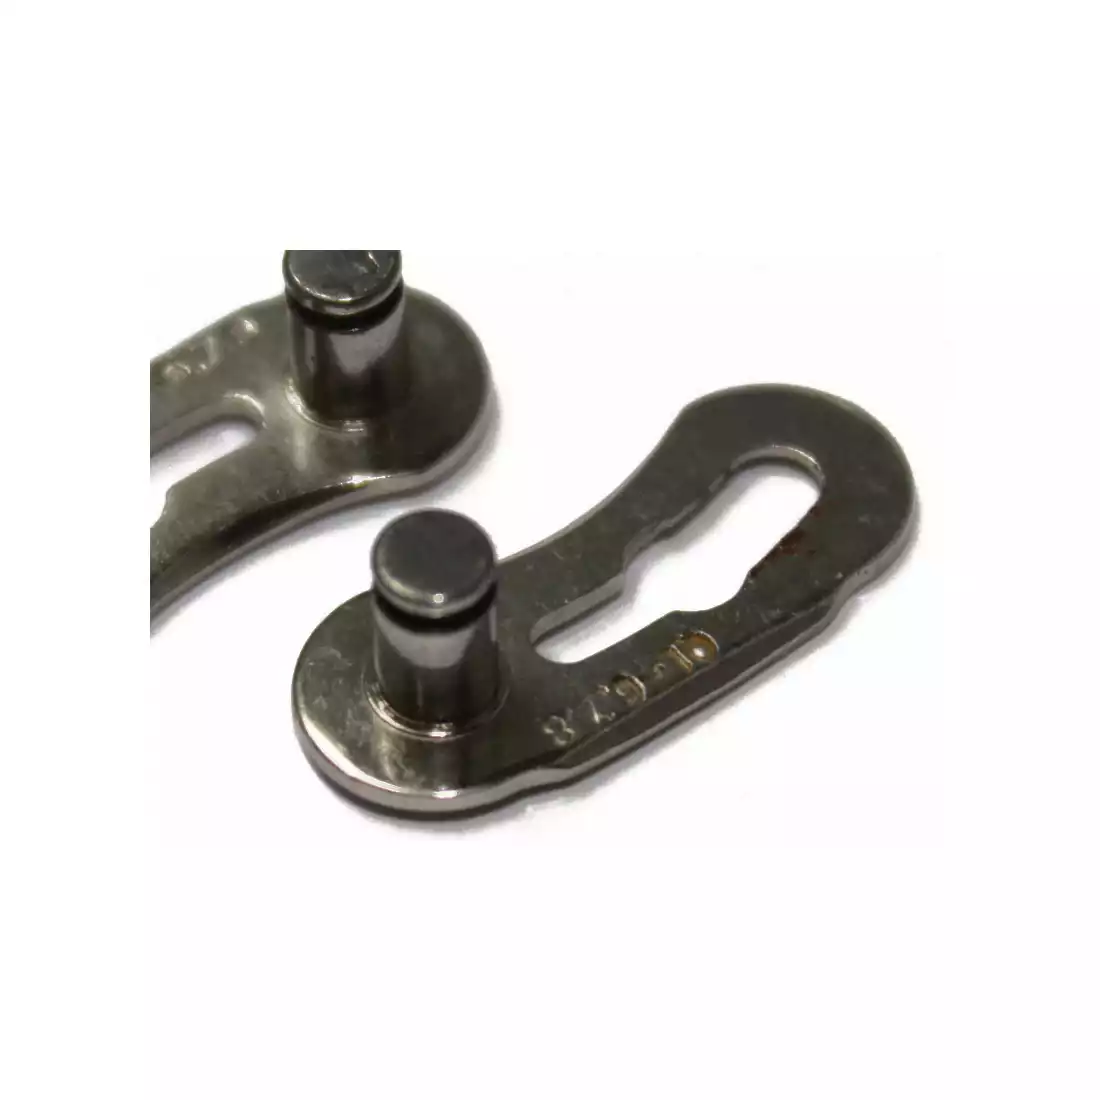 CLARKS CL410 Bicycle chain clip, 1-row Single Speed, Silver